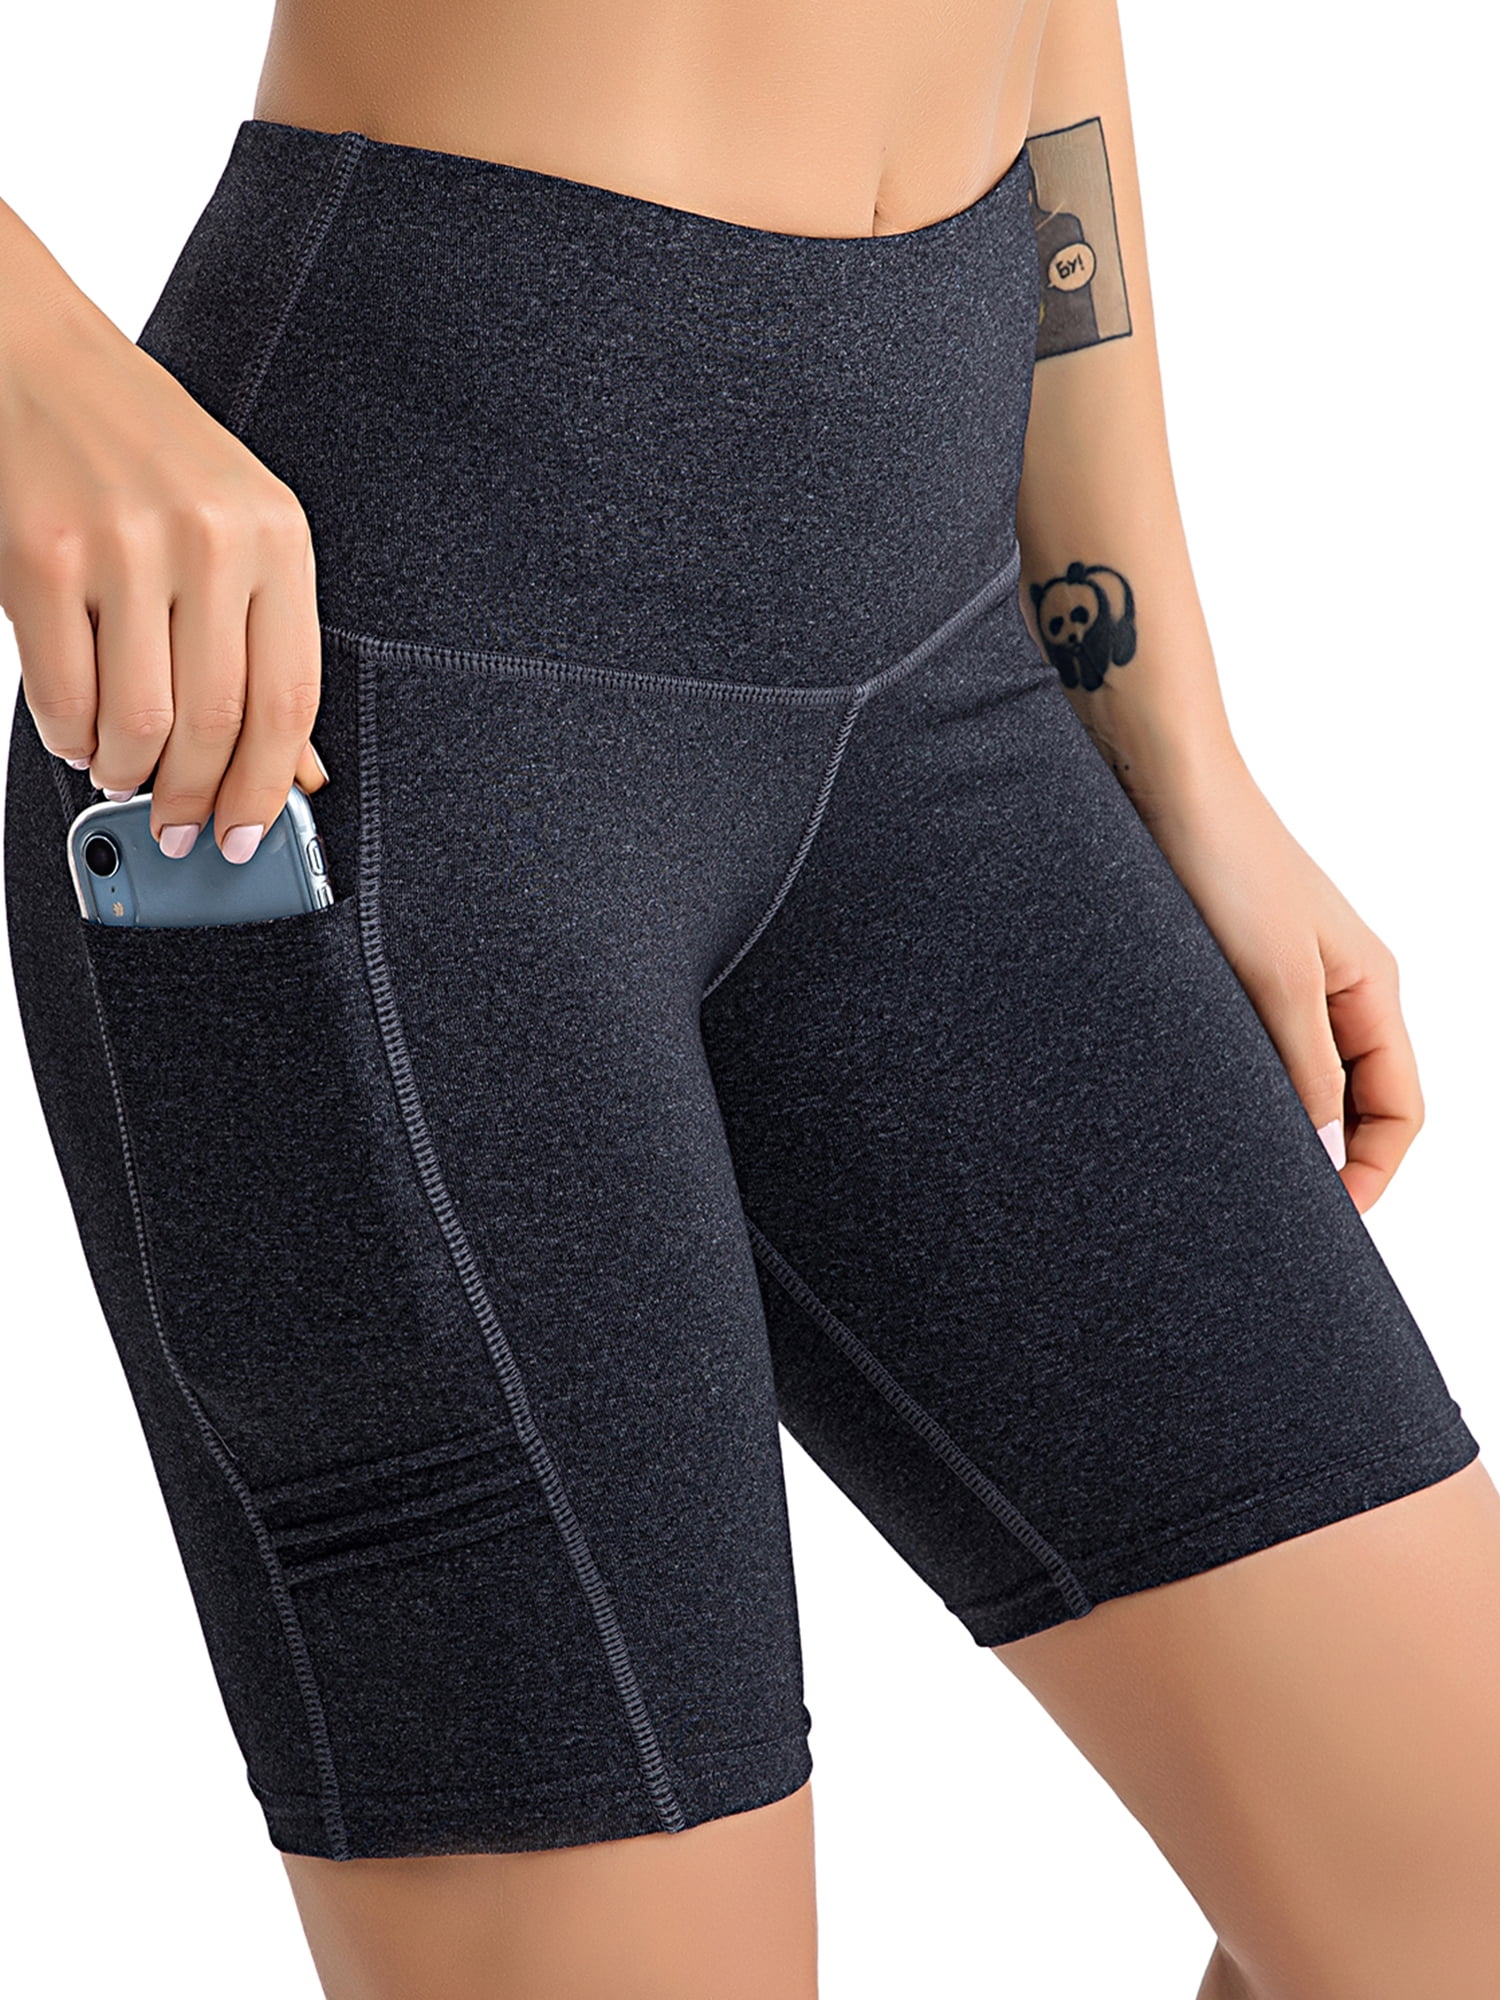 Workout Shorts Clothing For Women Activewear Yoga Shorts Gift For Female Shorts For Women Woman Clothing Gift For Her